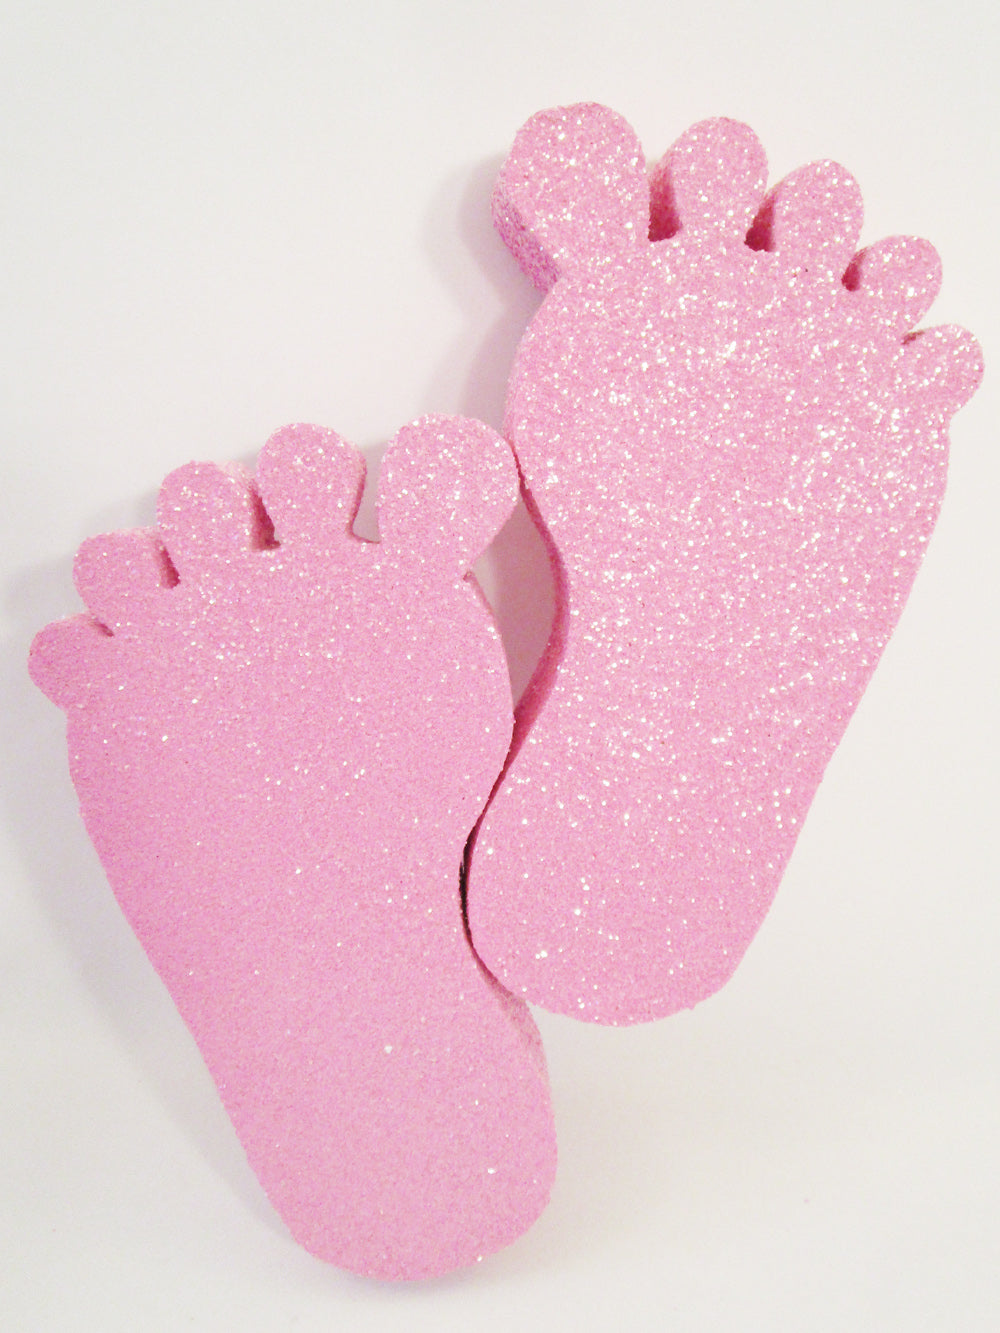 Large Pair of baby feet styrofoam cutout - Designs by Ginny